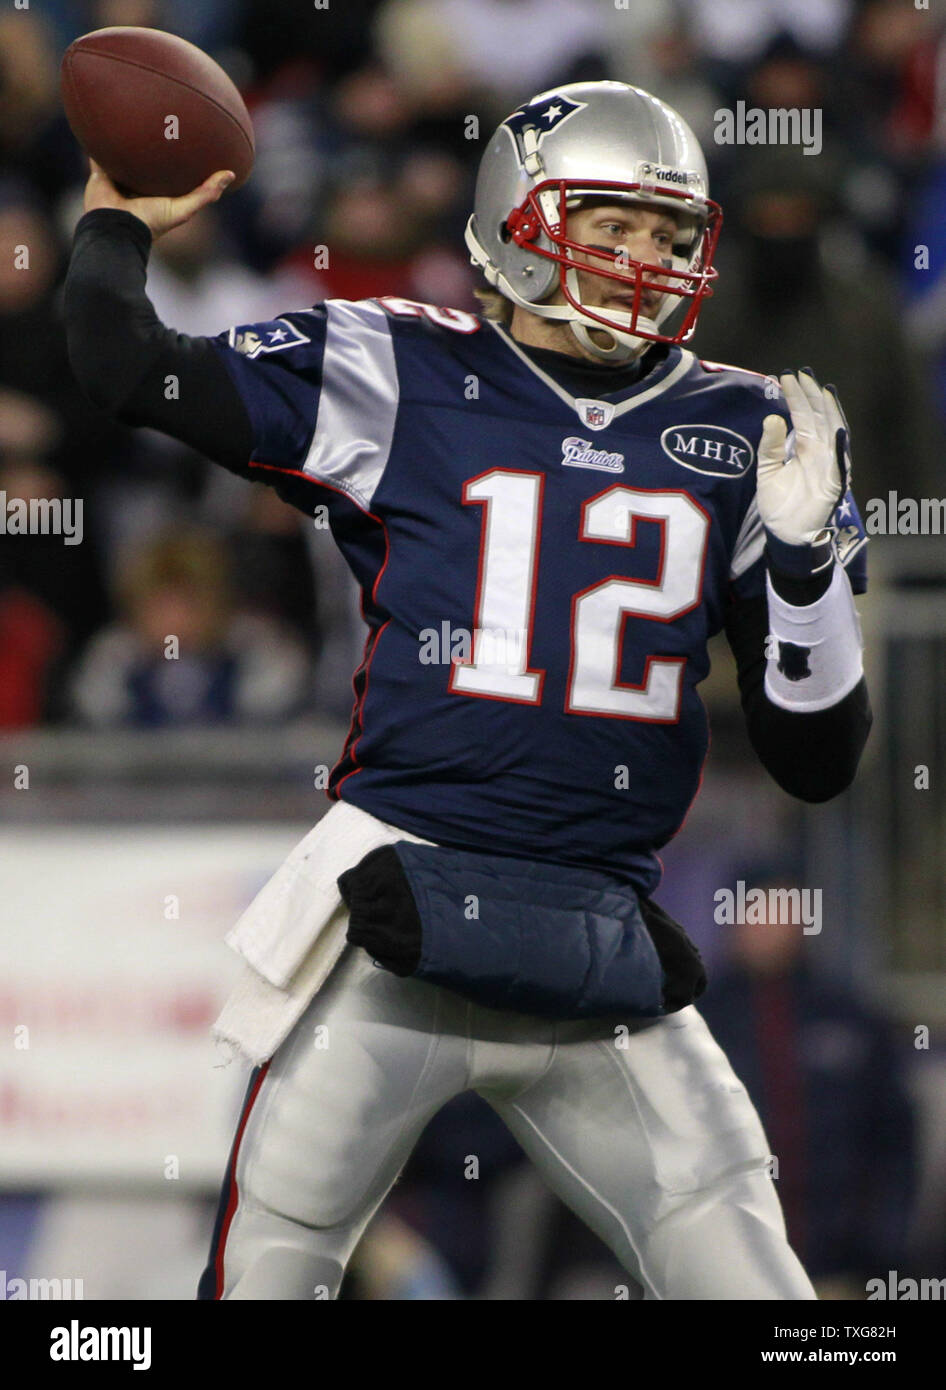 New England Patriots quarterback Tom Brady throws a pass in the first quarter against the Denver Broncos in the AFC divisional playoff game at Gillette Stadium in Foxboro, Massachusetts on January 14, 2012.    UPI/Matthew Healey Stock Photo